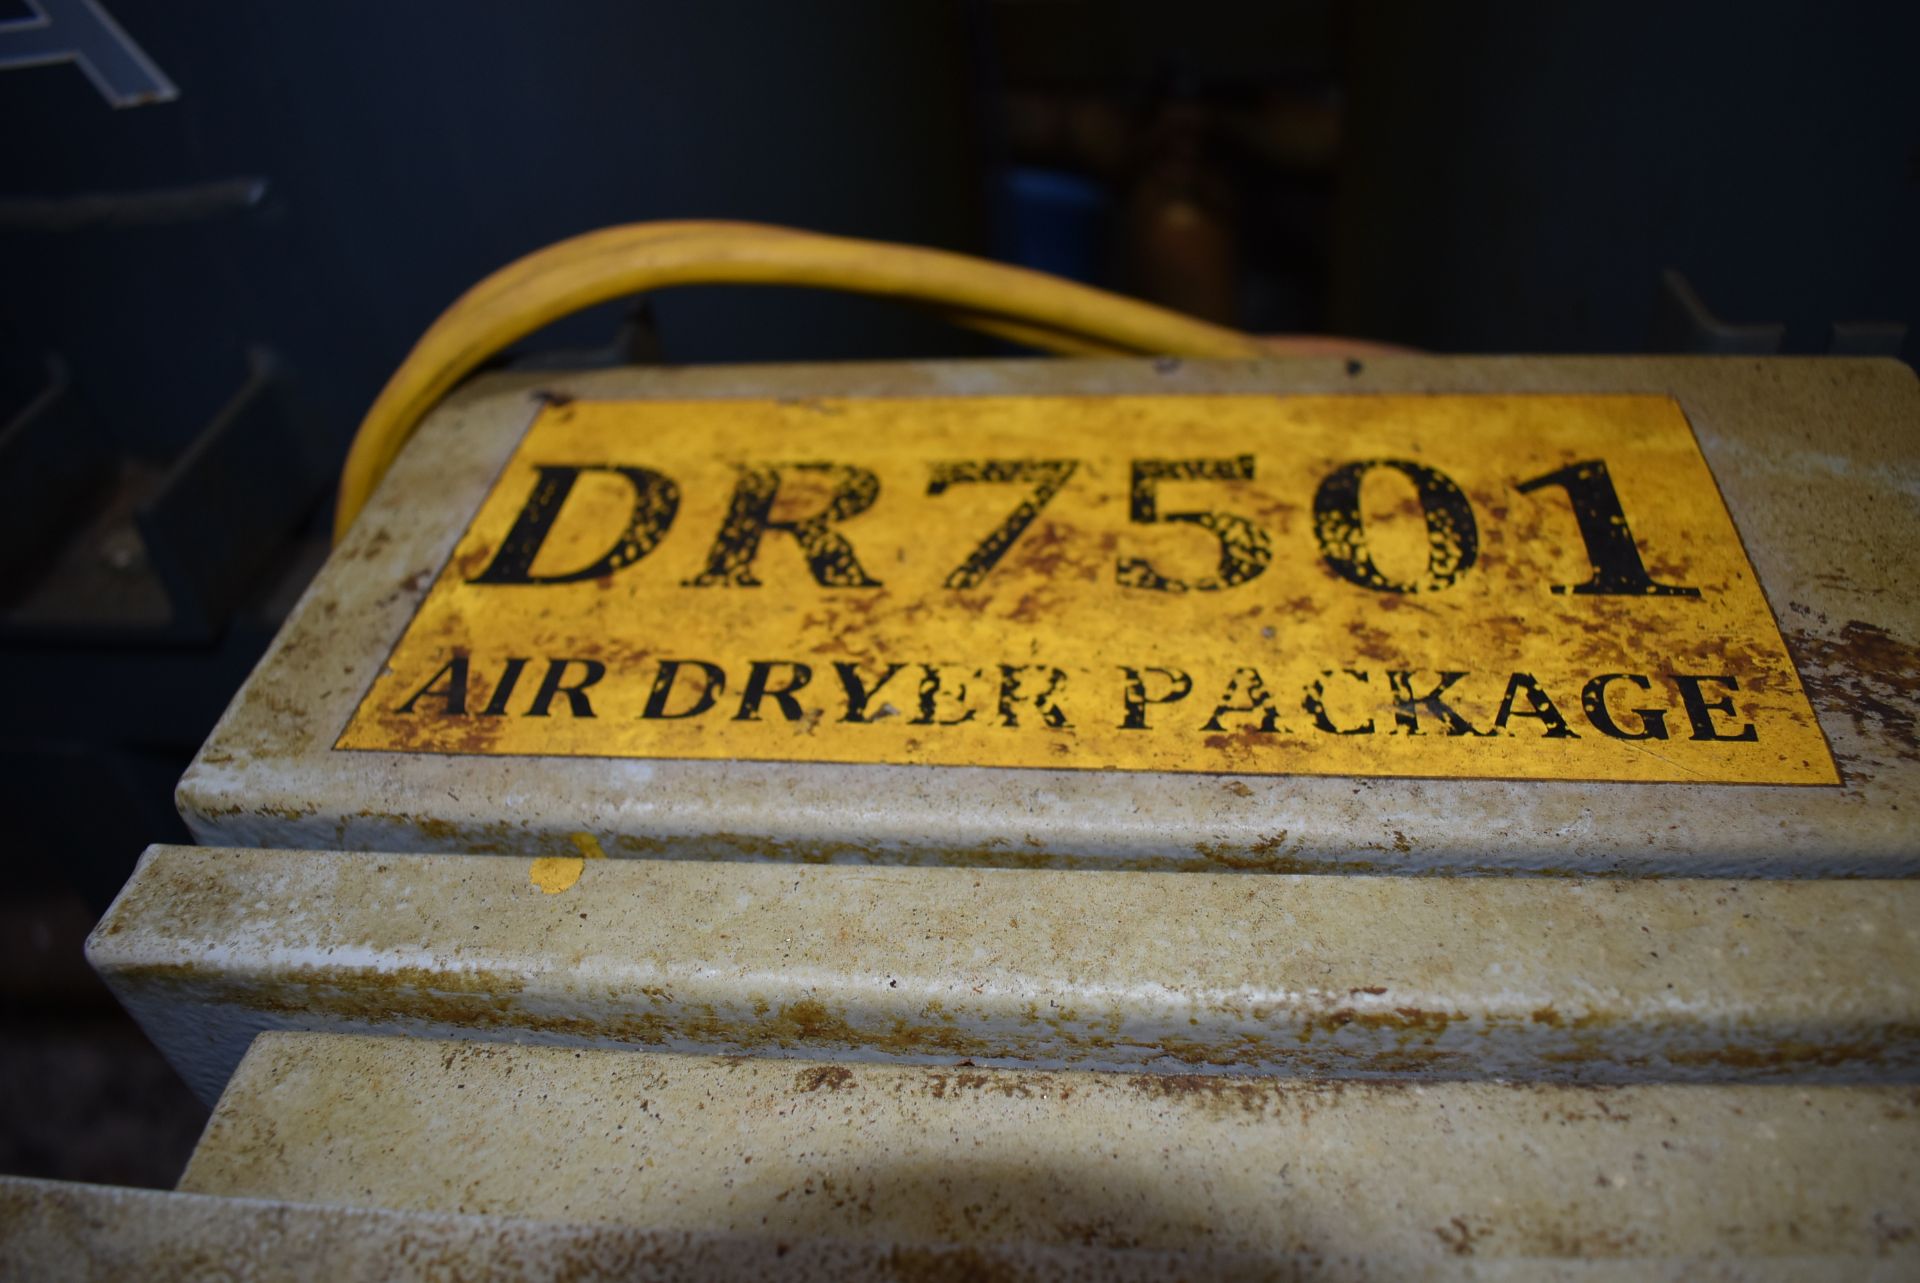 Atlas Copco Model #DR-7501 Air Dryer Package. RIGGING/LOADING FEE $75 - Image 2 of 3